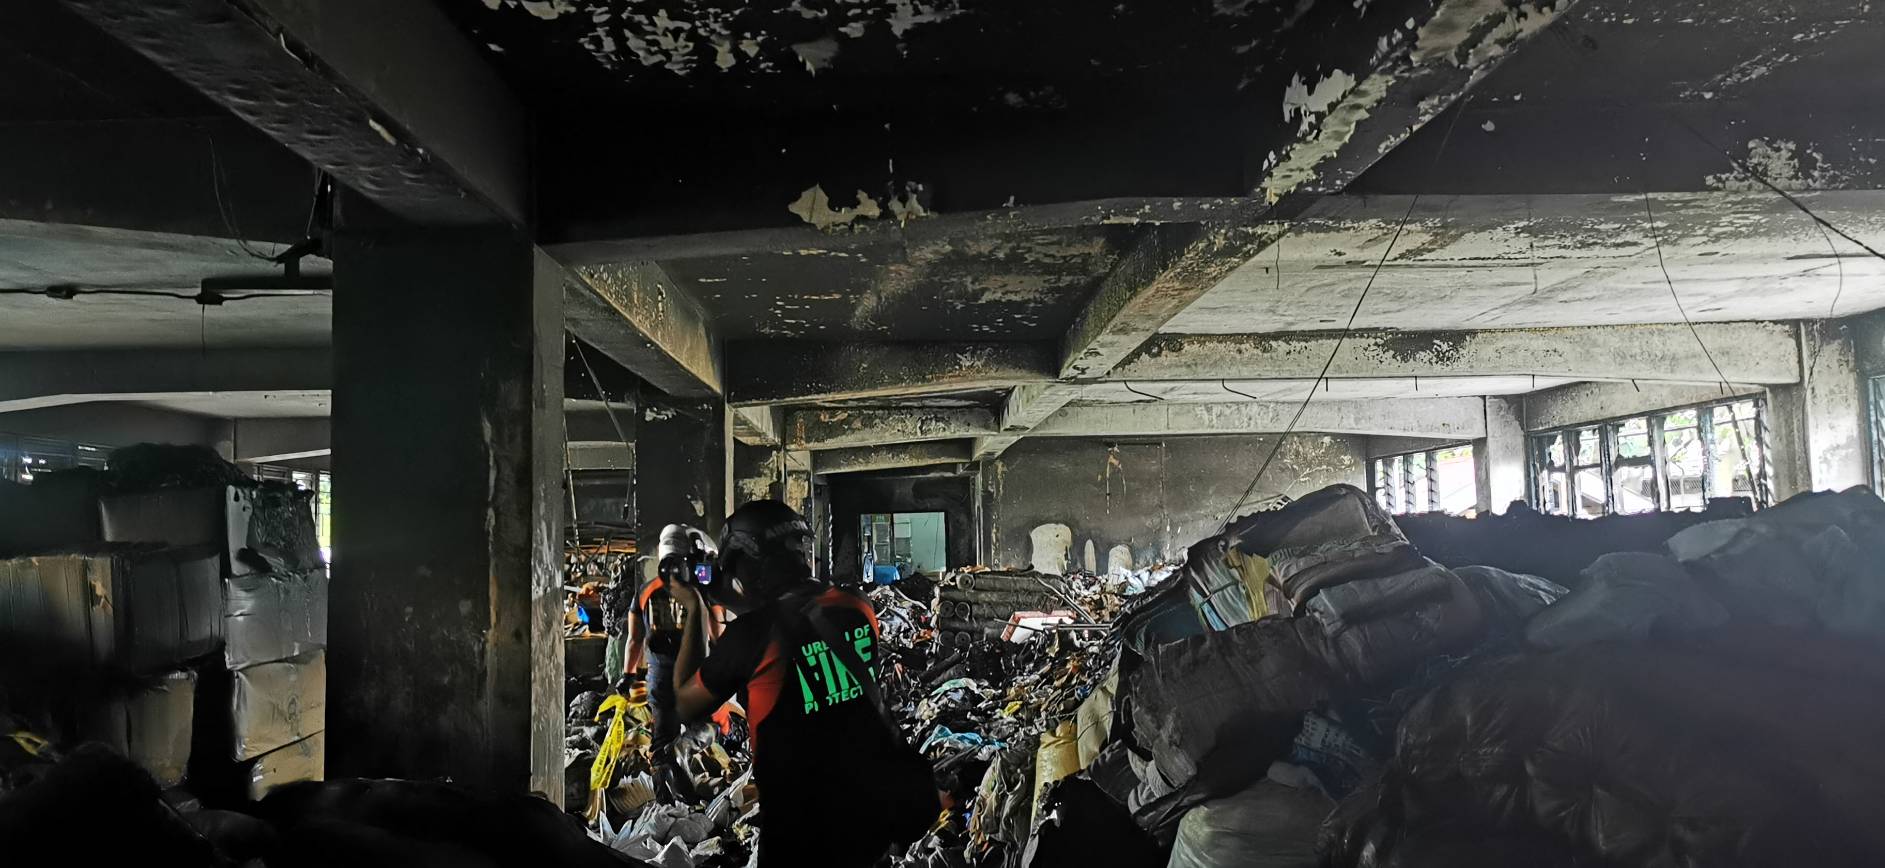 Inside the burned out building after the fire had been extinguished. 【Photo by Johnny Kwok】